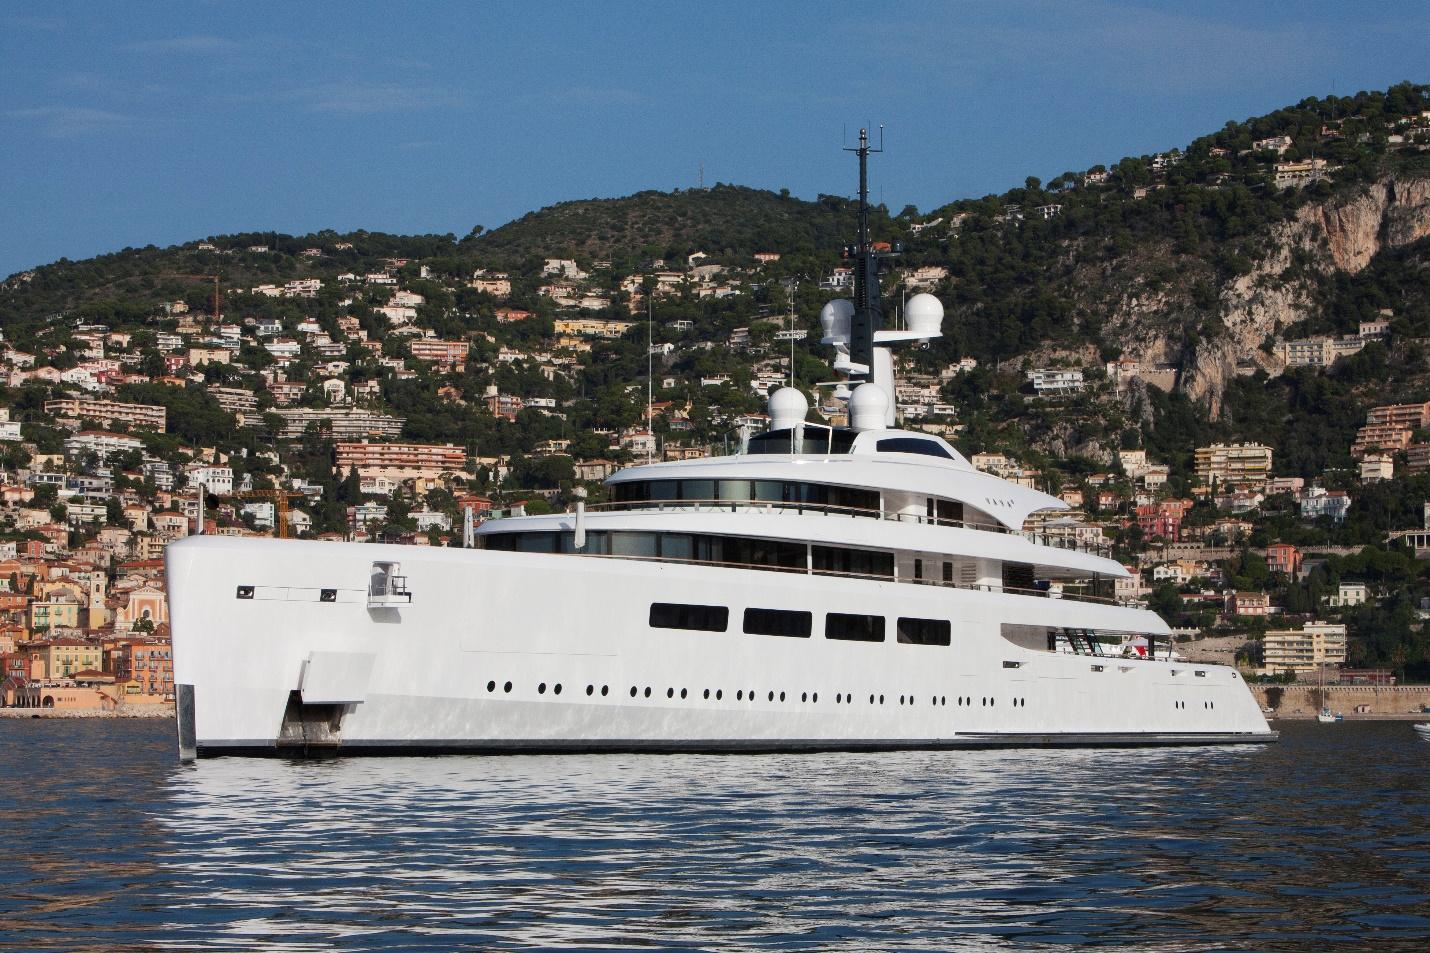 The yacht Vava II was built by Devonport in 2012.